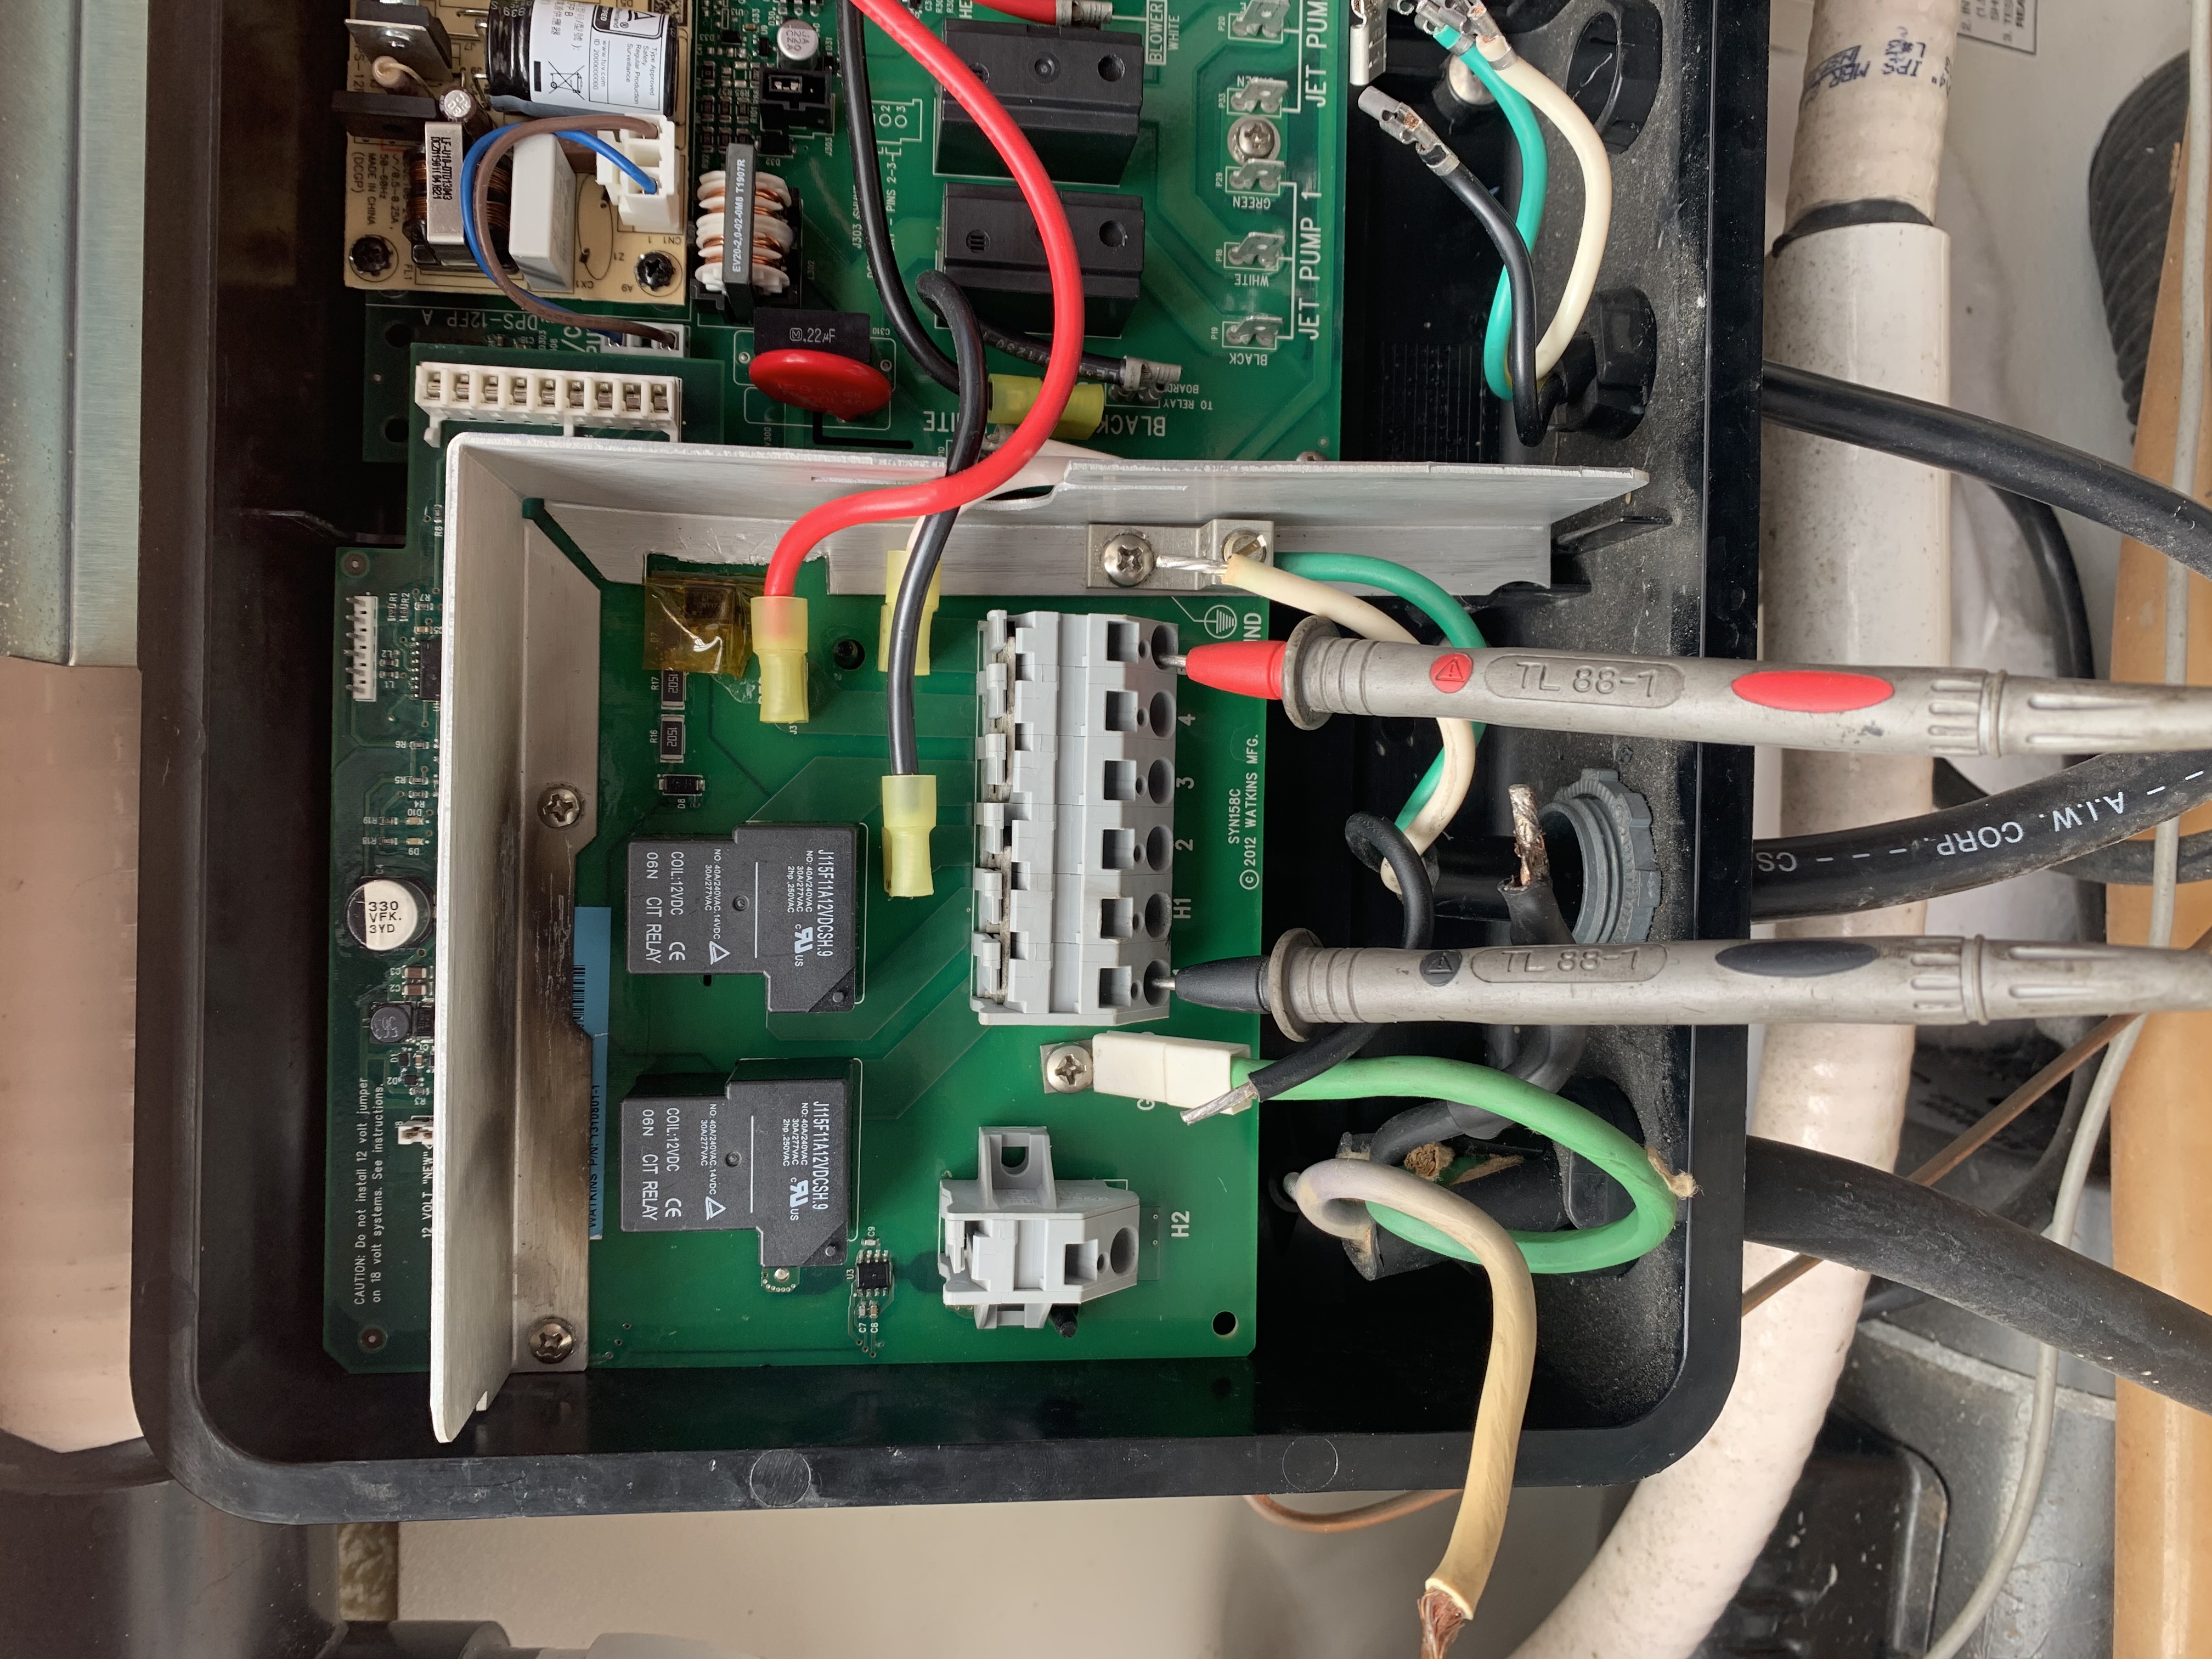 Tiger River iq2020 troubleshooting - Portable Hot Tubs & Spas - Pool and Spa  Forum  Iq 2020 Spa Control System Wiring Diagram    Pool Spa Forum